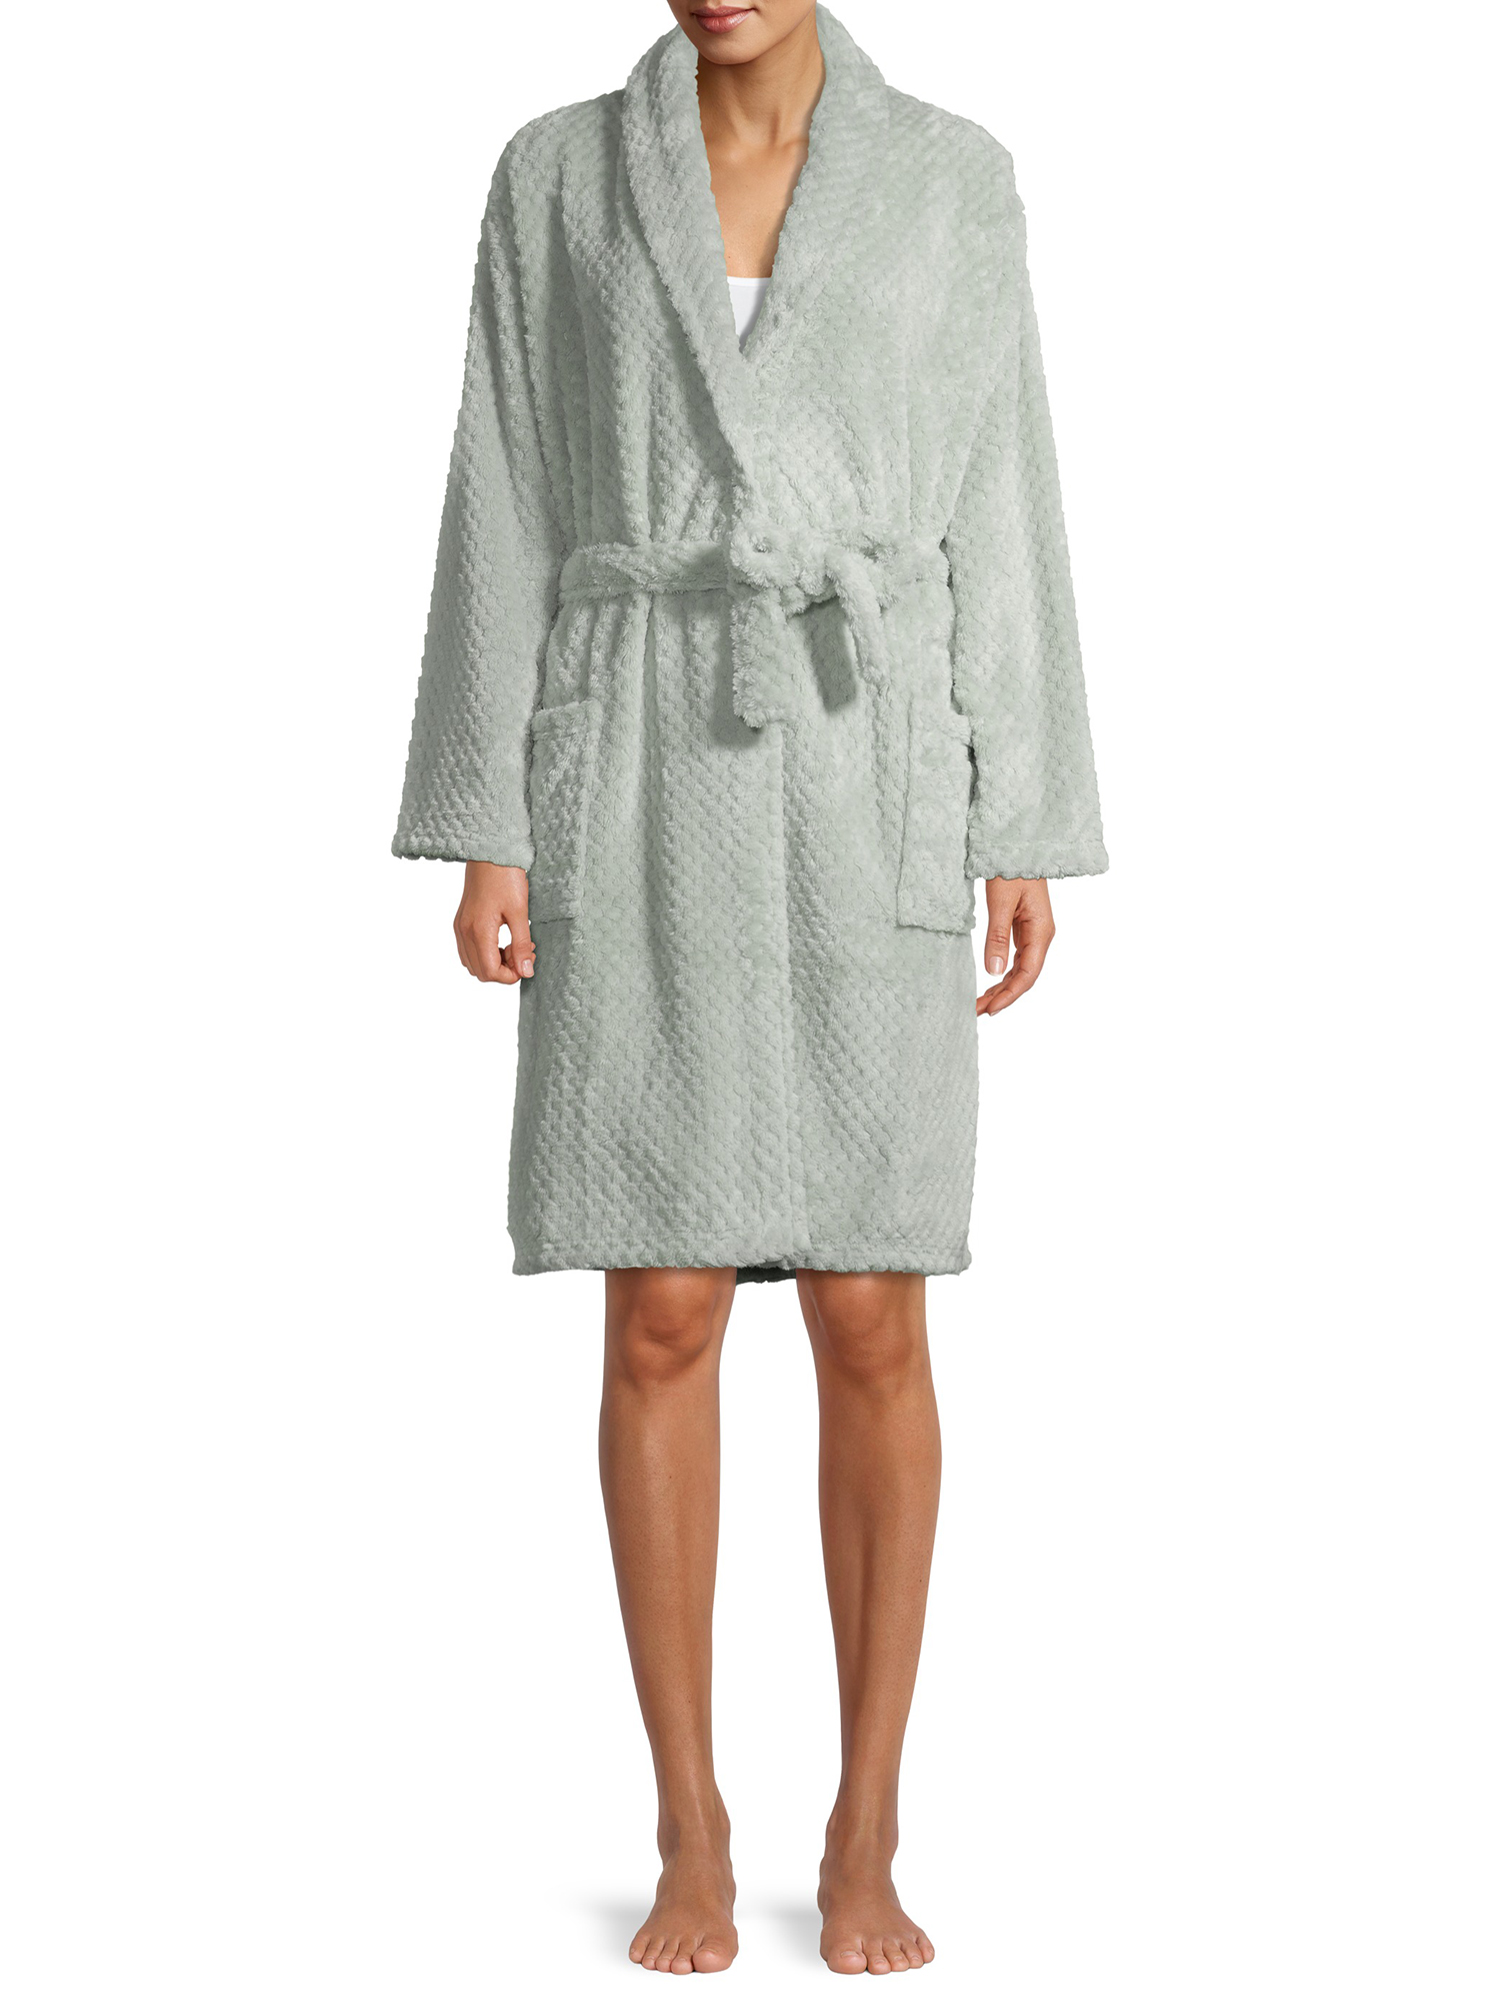 The Cozy Corner Club Durable Easy Care Textured Evening Robe (Women's), 1 Pack - image 5 of 7